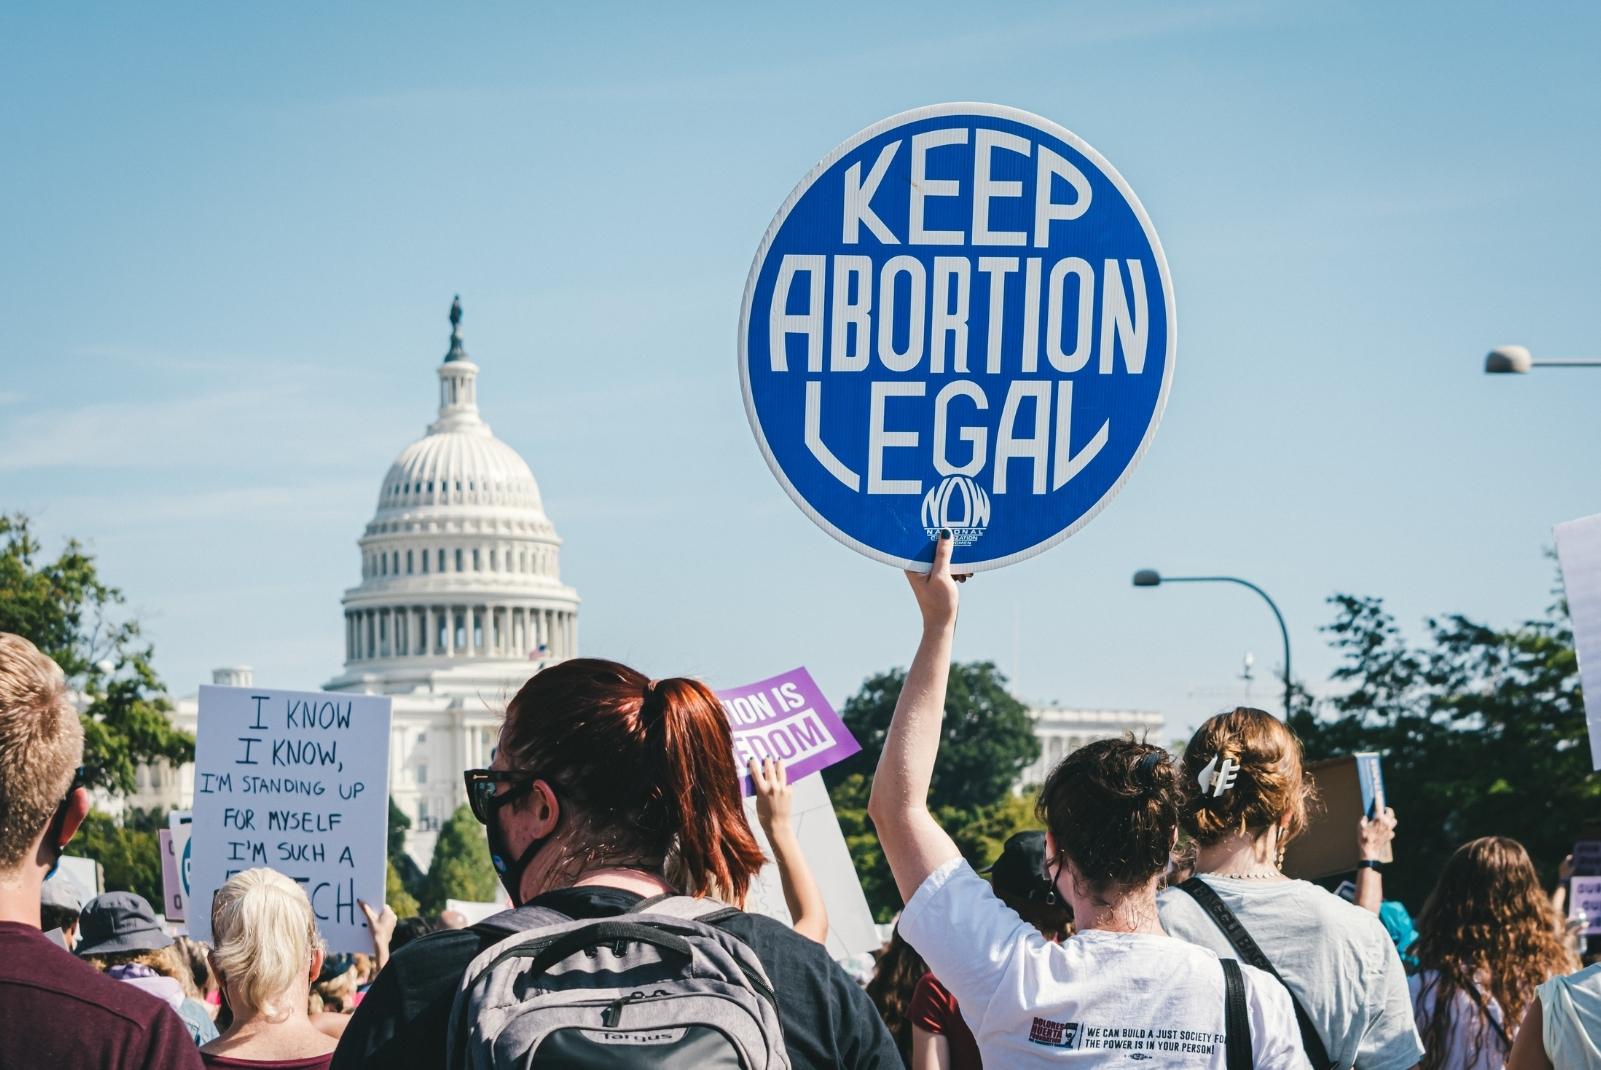 Protest sign reads "keep abortion legal"